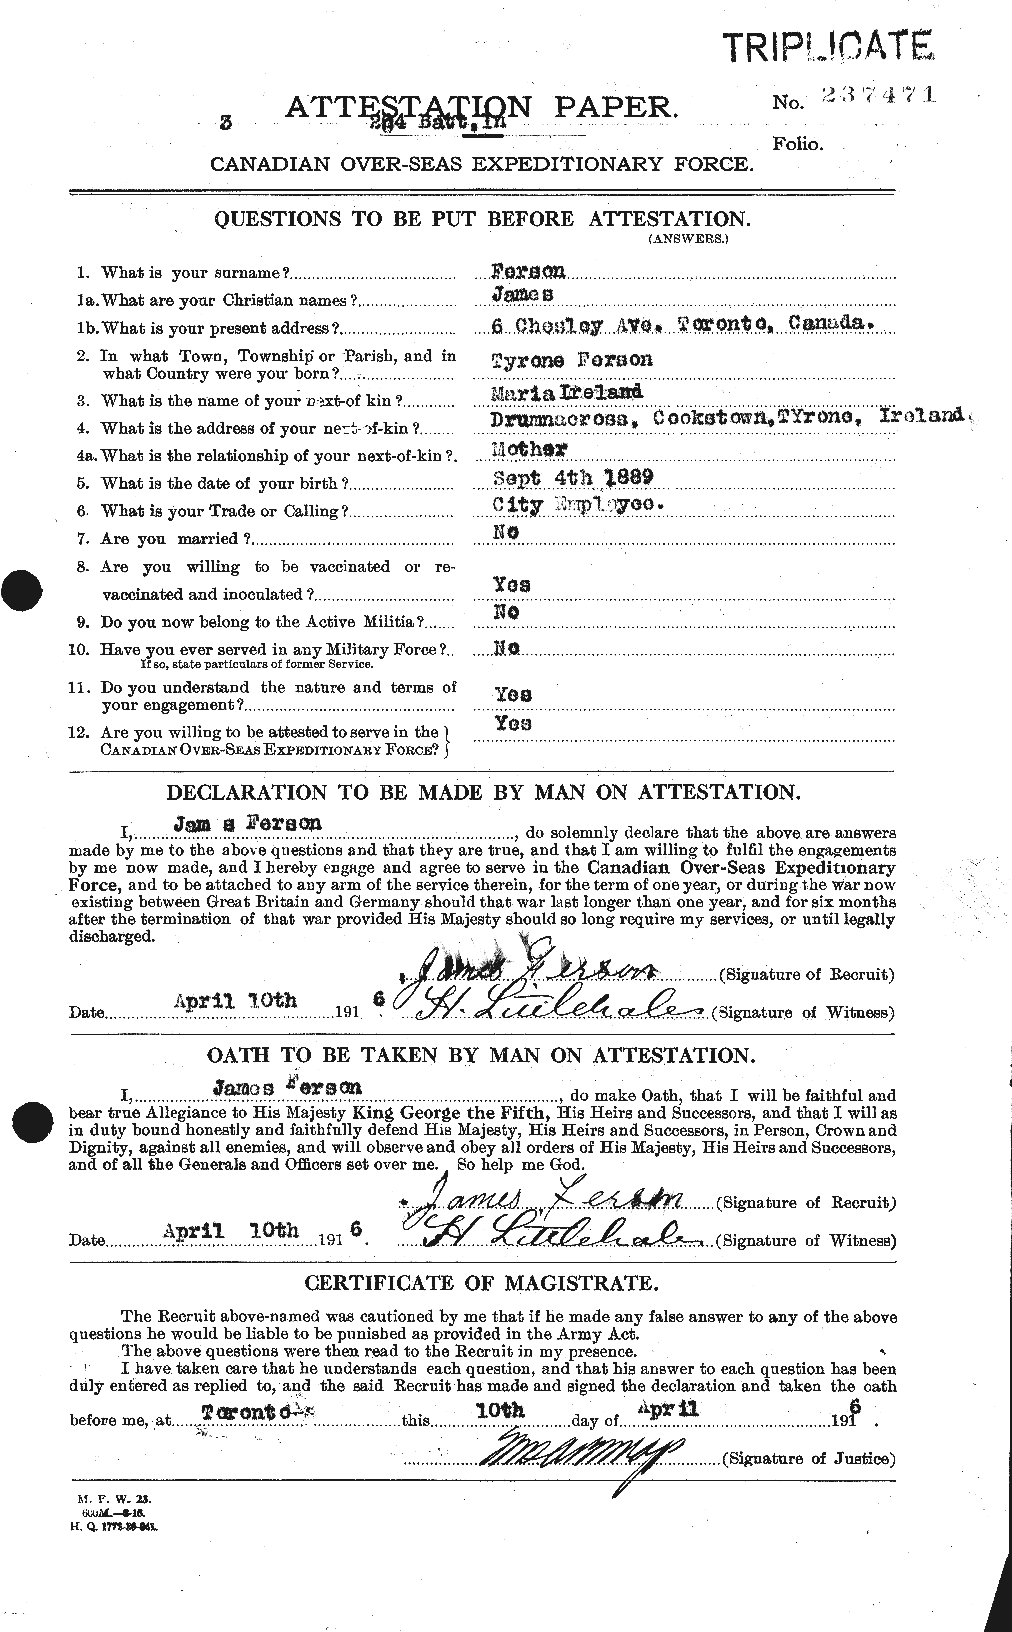 Personnel Records of the First World War - CEF 325831a